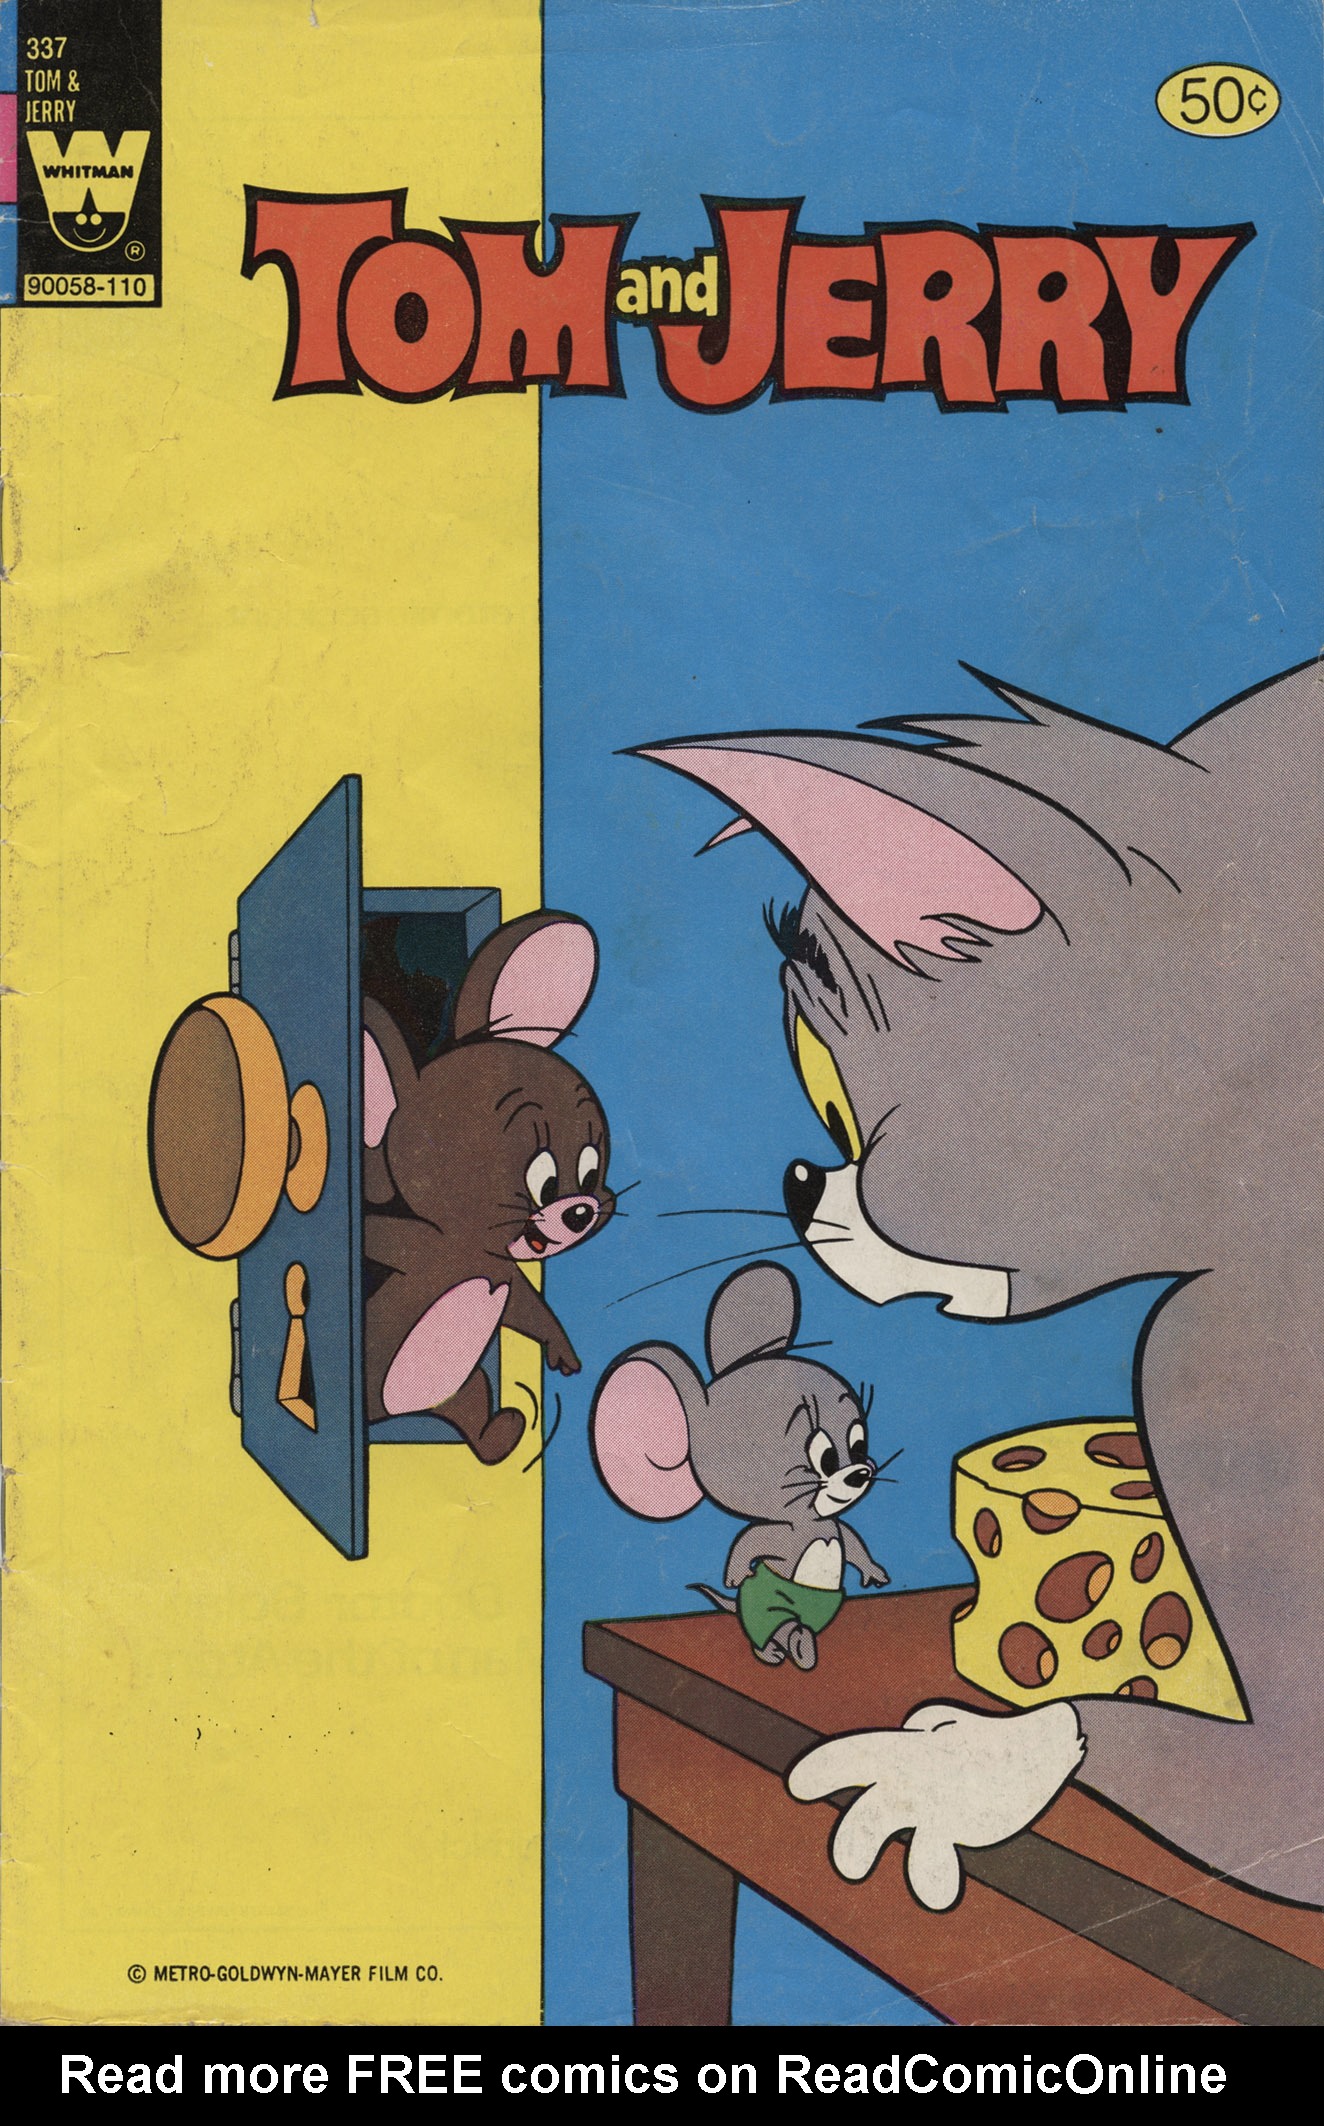 Read online Tom and Jerry comic -  Issue #337 - 1